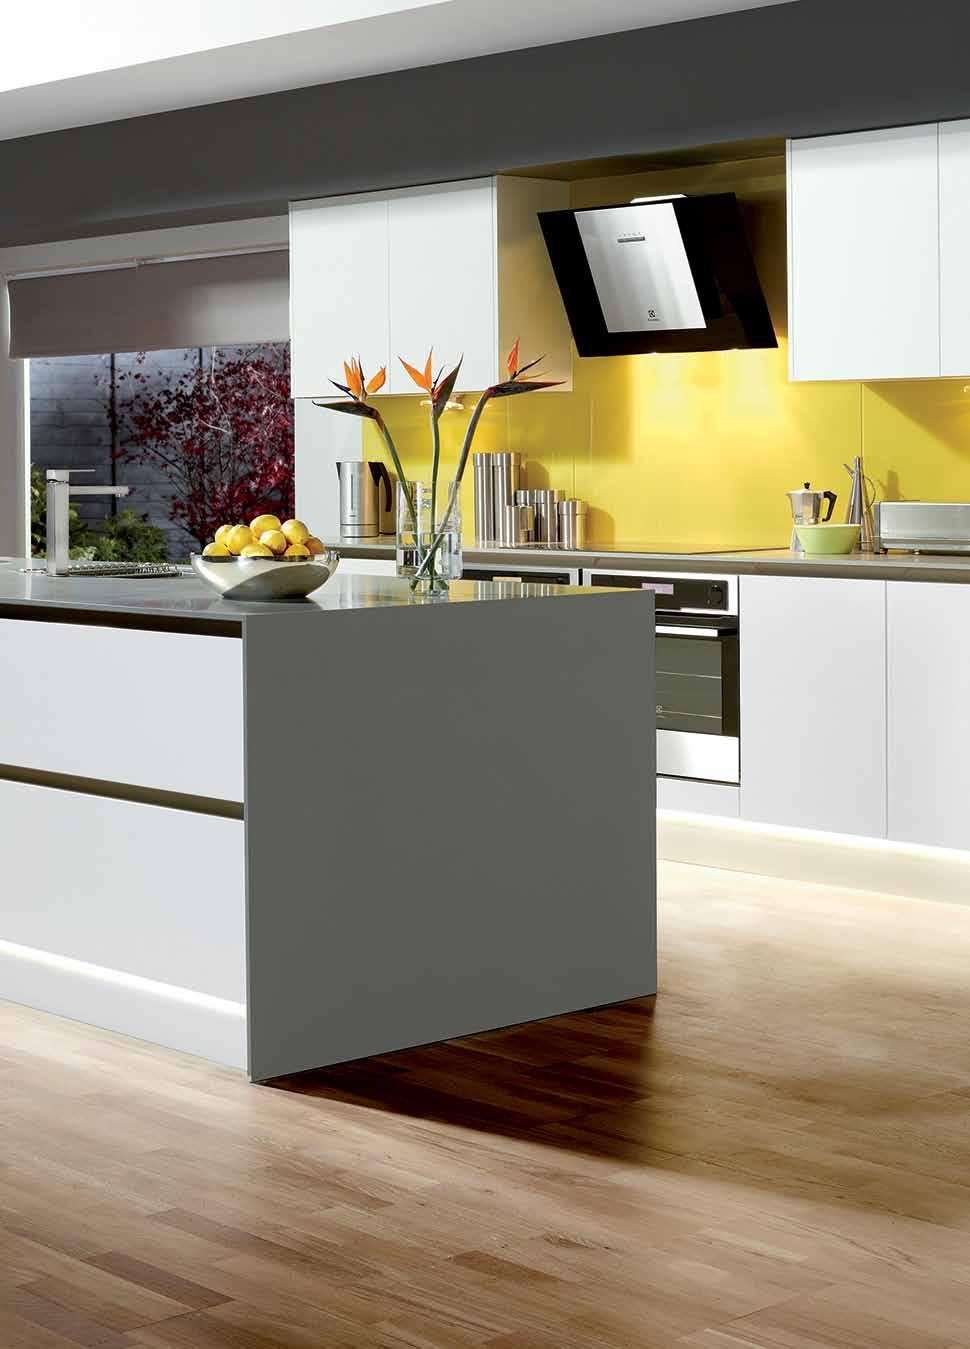 STYLISH KITCHENS Ultimate style, stunning looks and maximum space saving has been the defining criteria for the design and build of Beacon Rise kitchens.